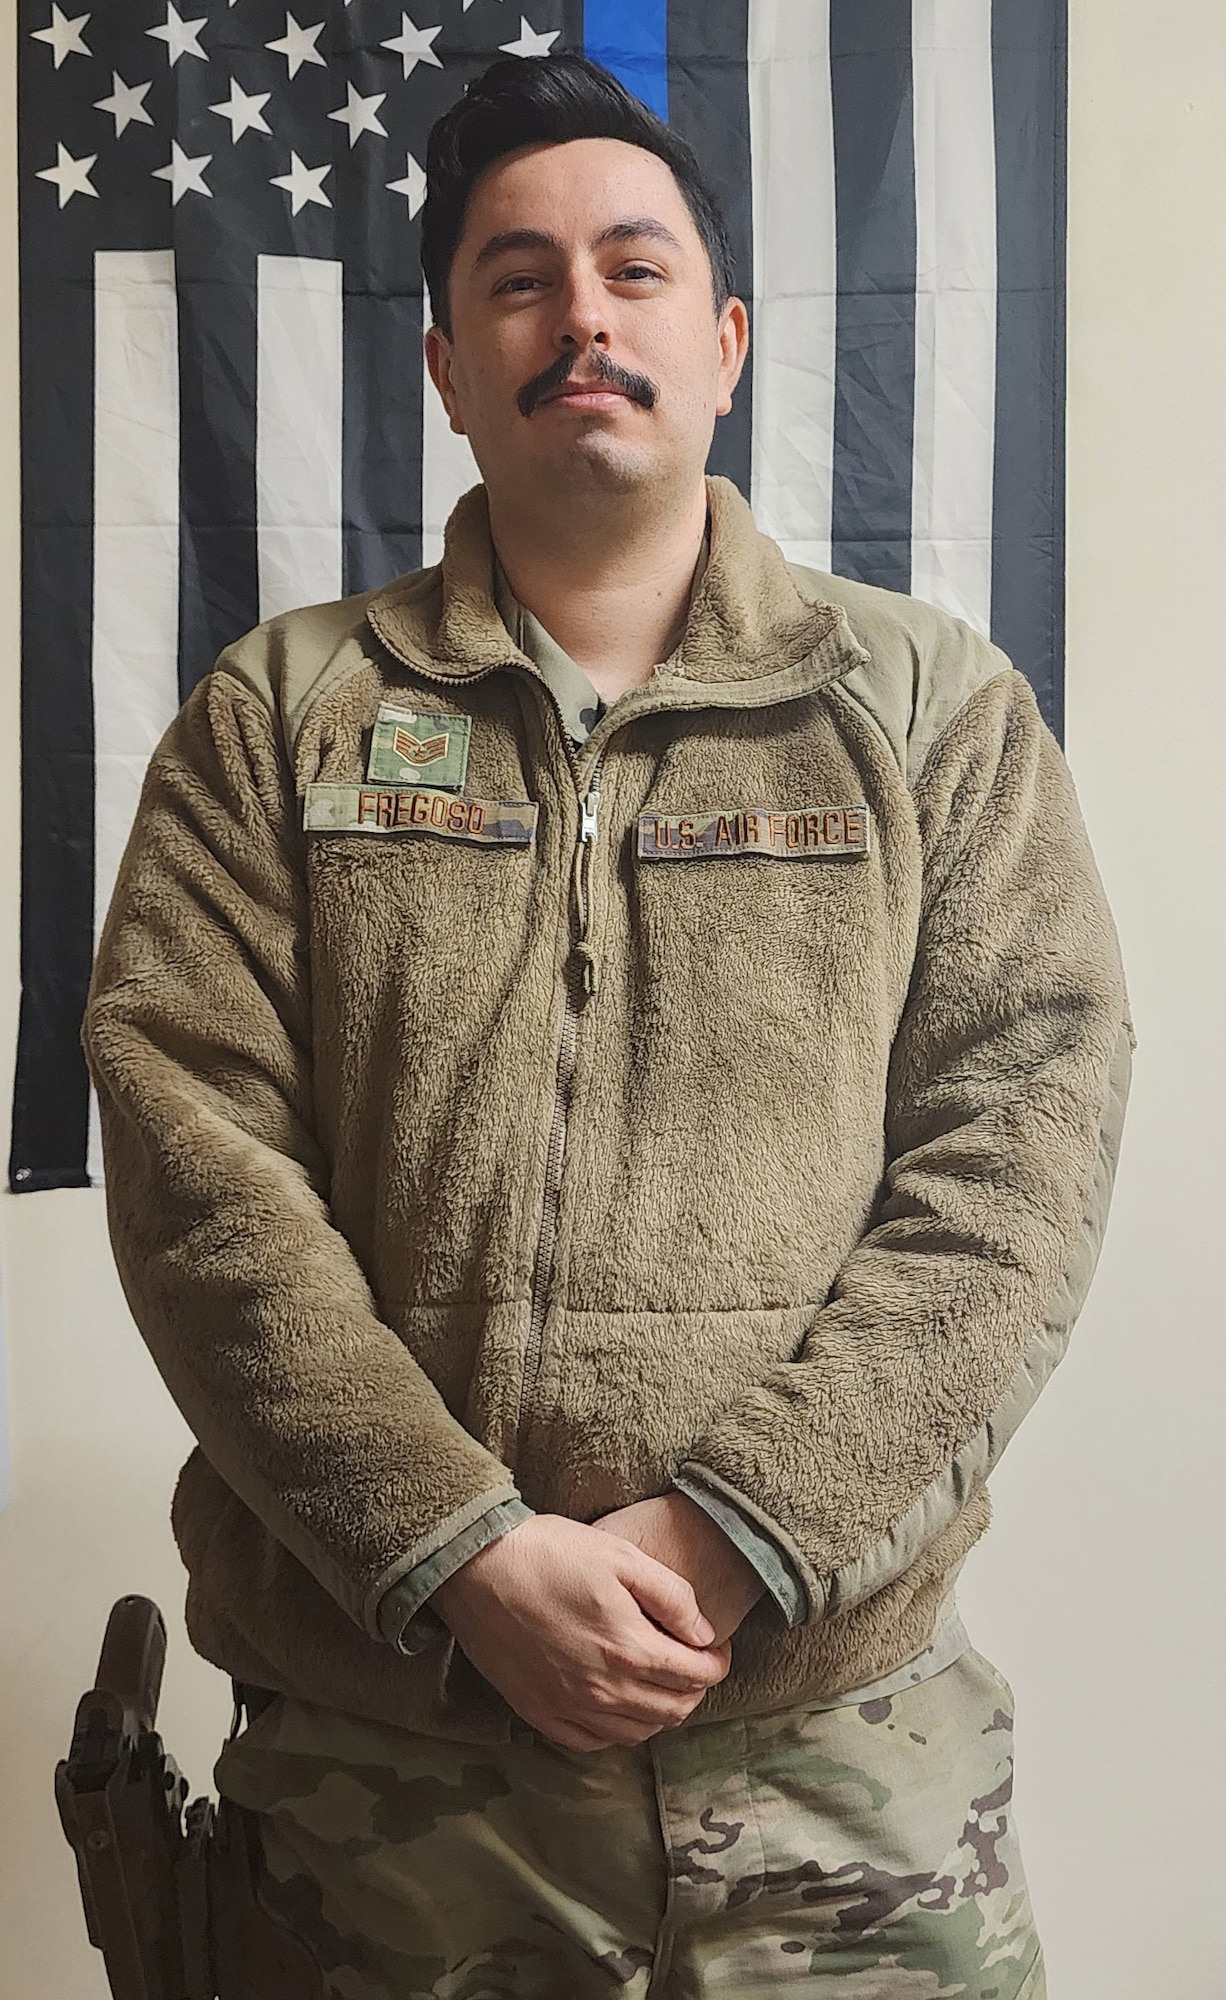 U.S. Air Force Staff Sgt. Erick Fregoso, 173rd Security Forces Squadron, poses for a picture before going on duty.